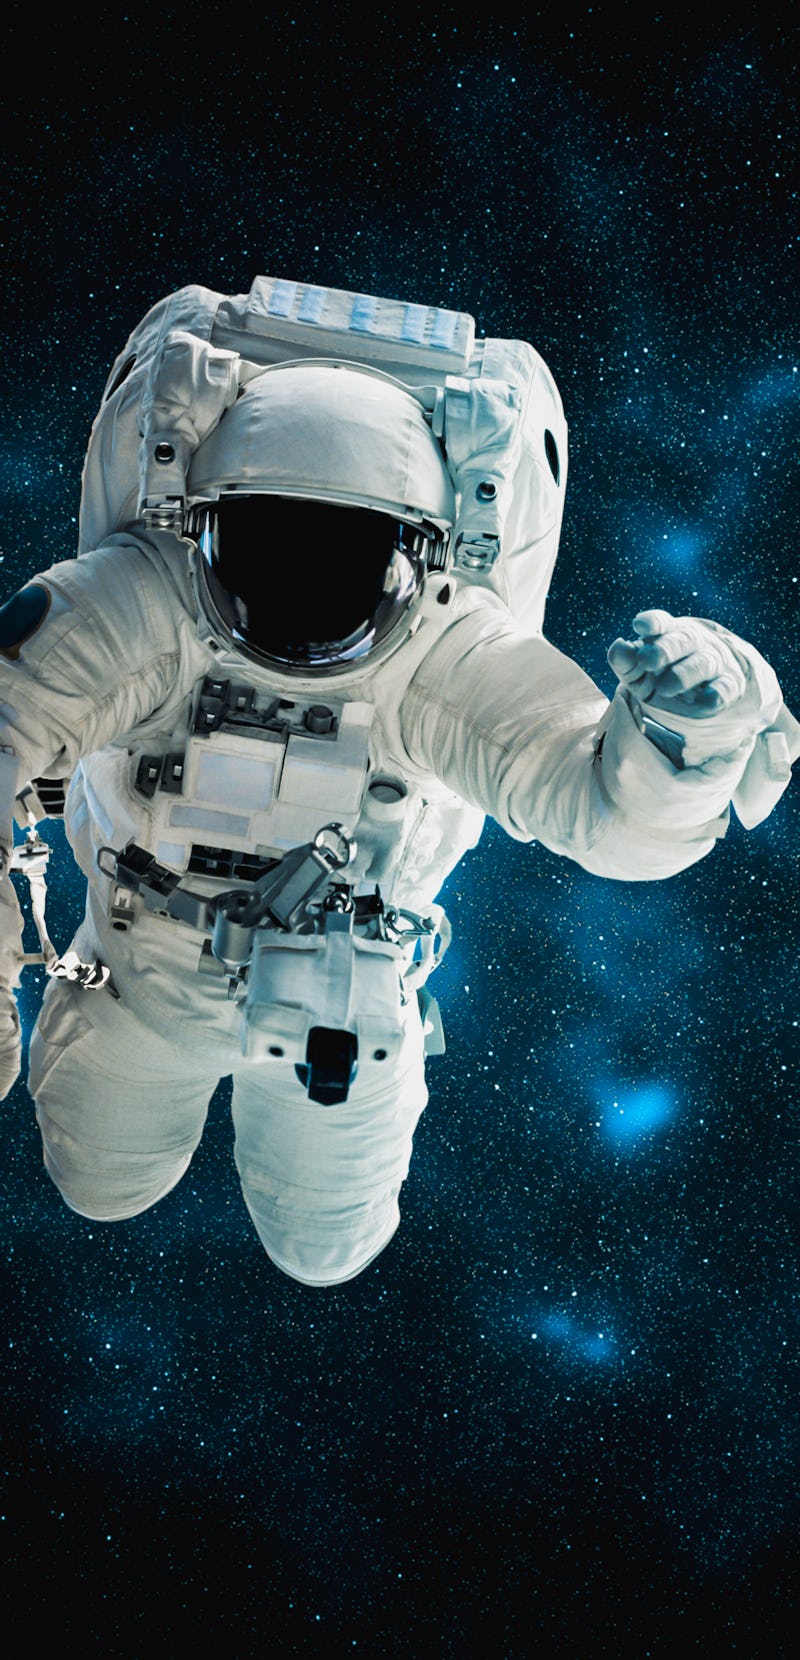 Astronaut spaceman doing spacewalk while working for space station in outer space